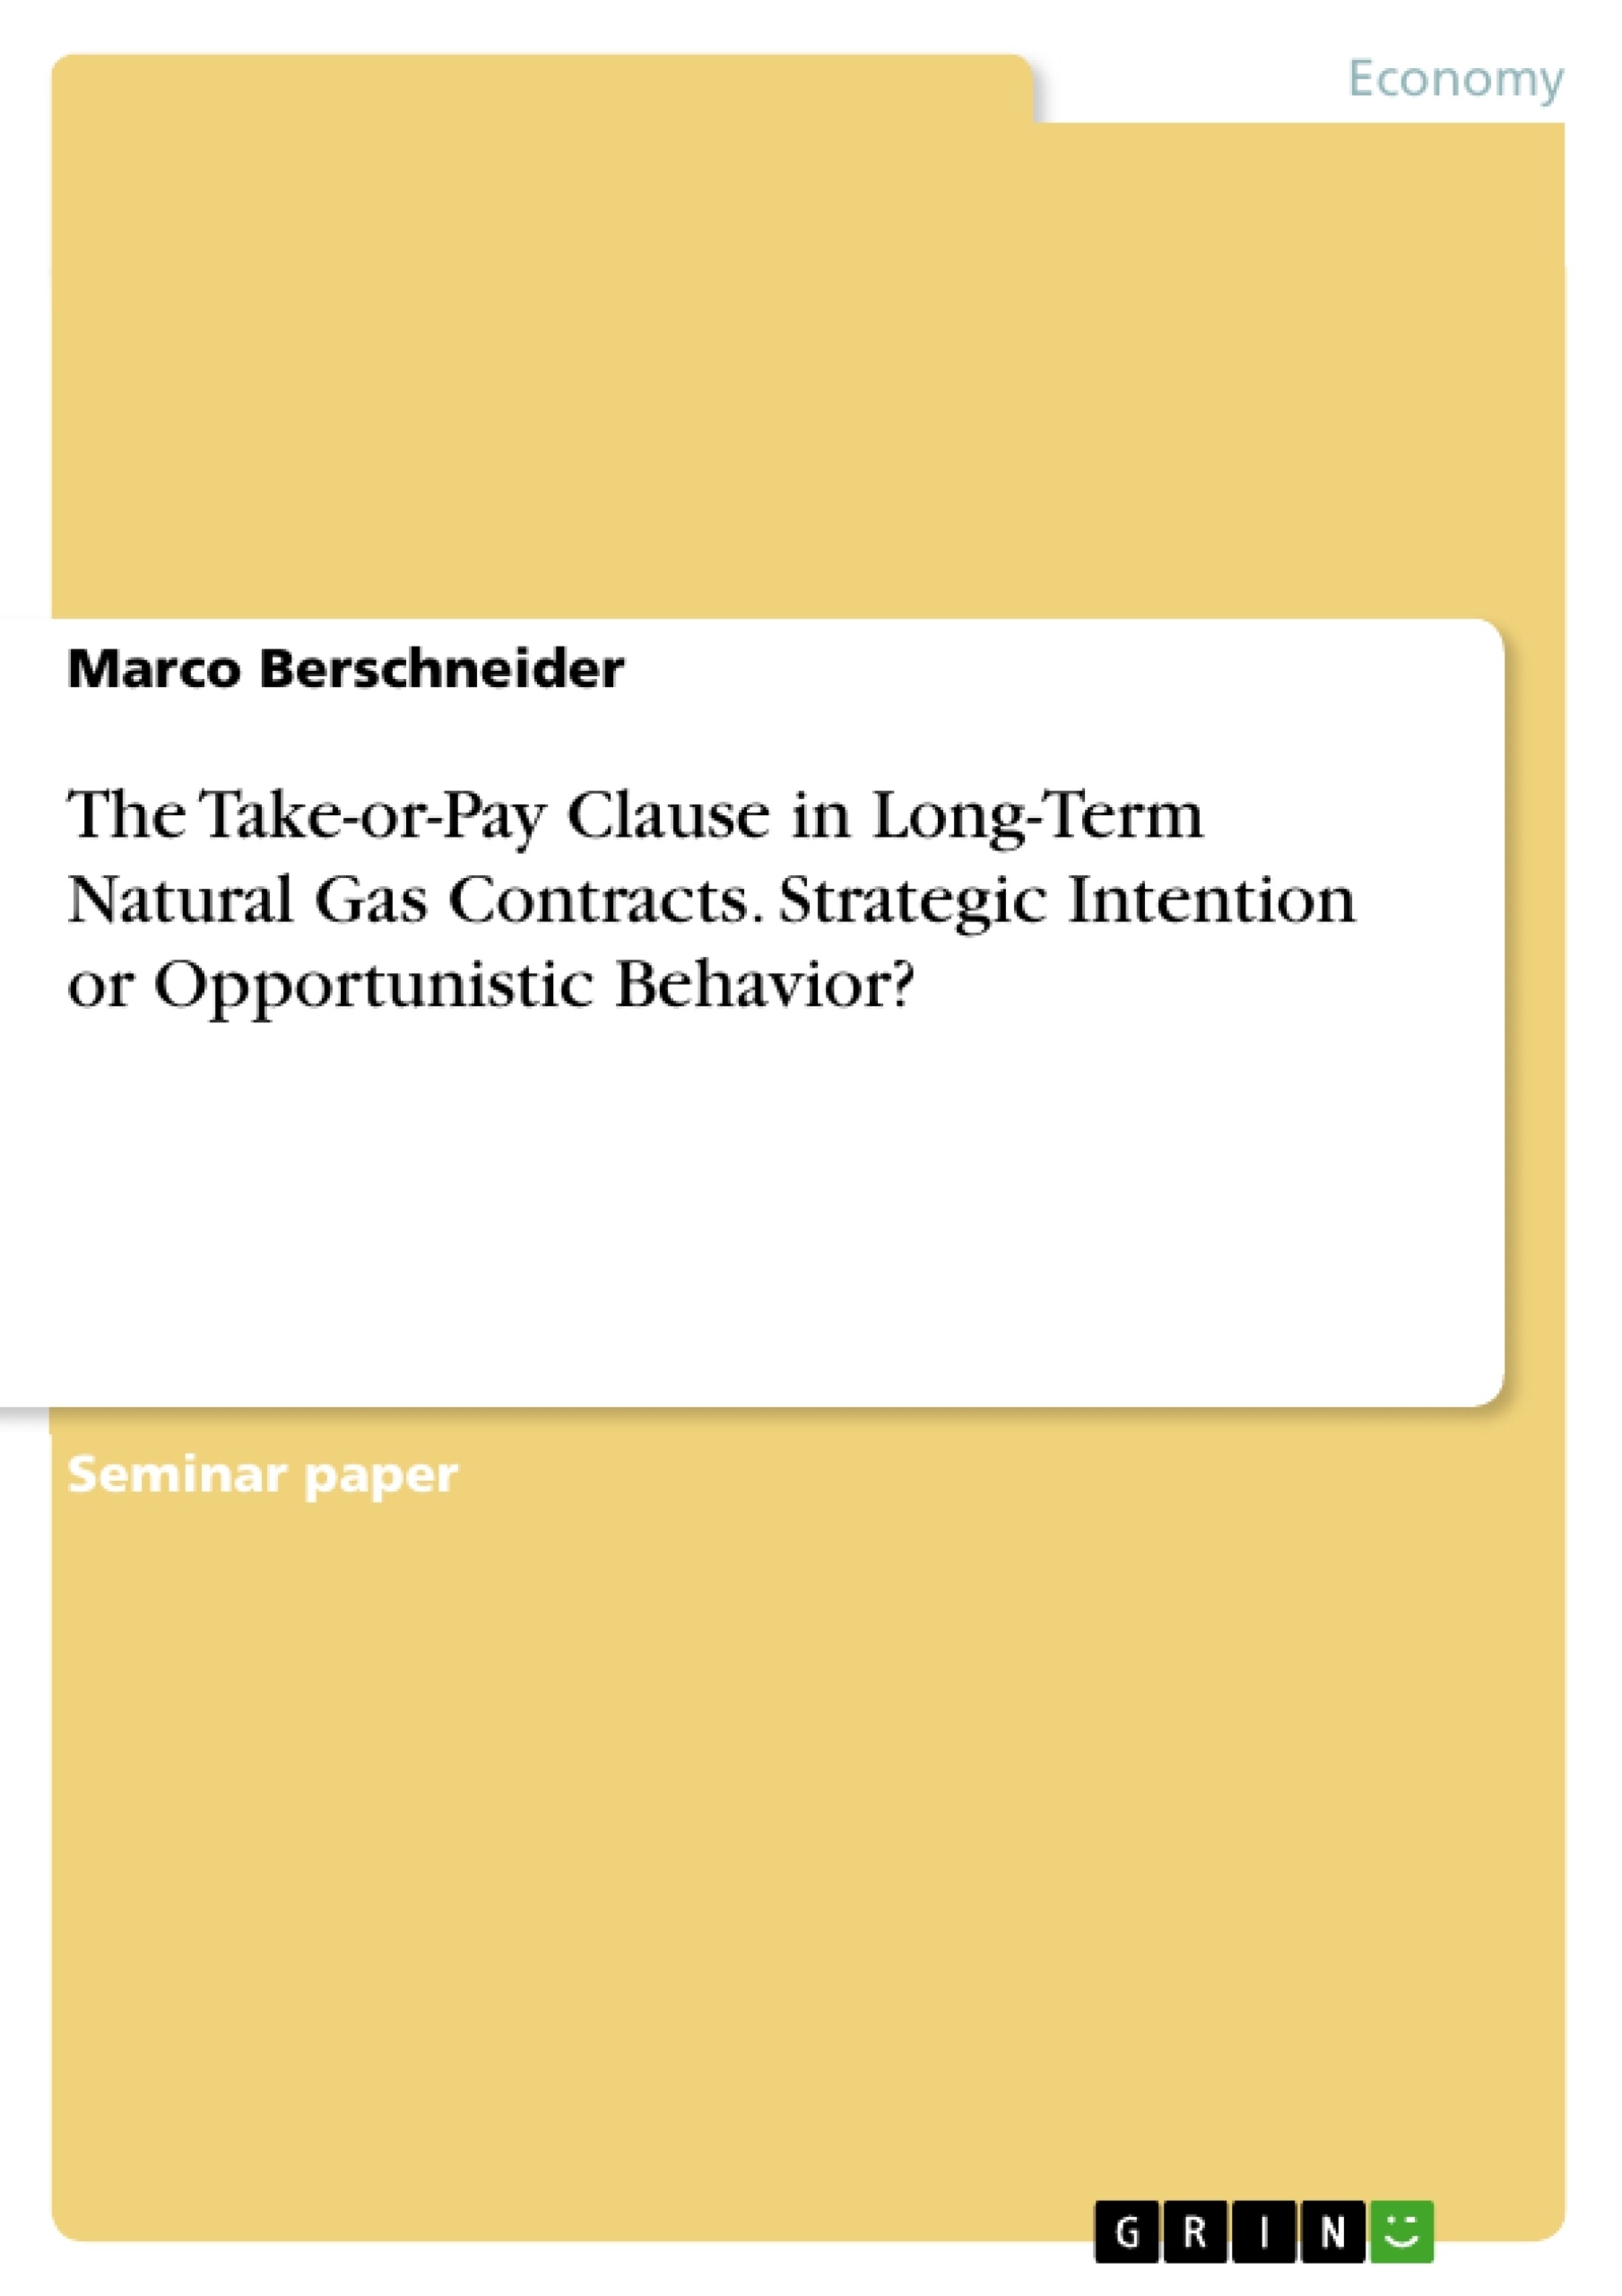 Title: The Take-or-Pay Clause in Long-Term Natural Gas Contracts. Strategic Intention or Opportunistic Behavior?